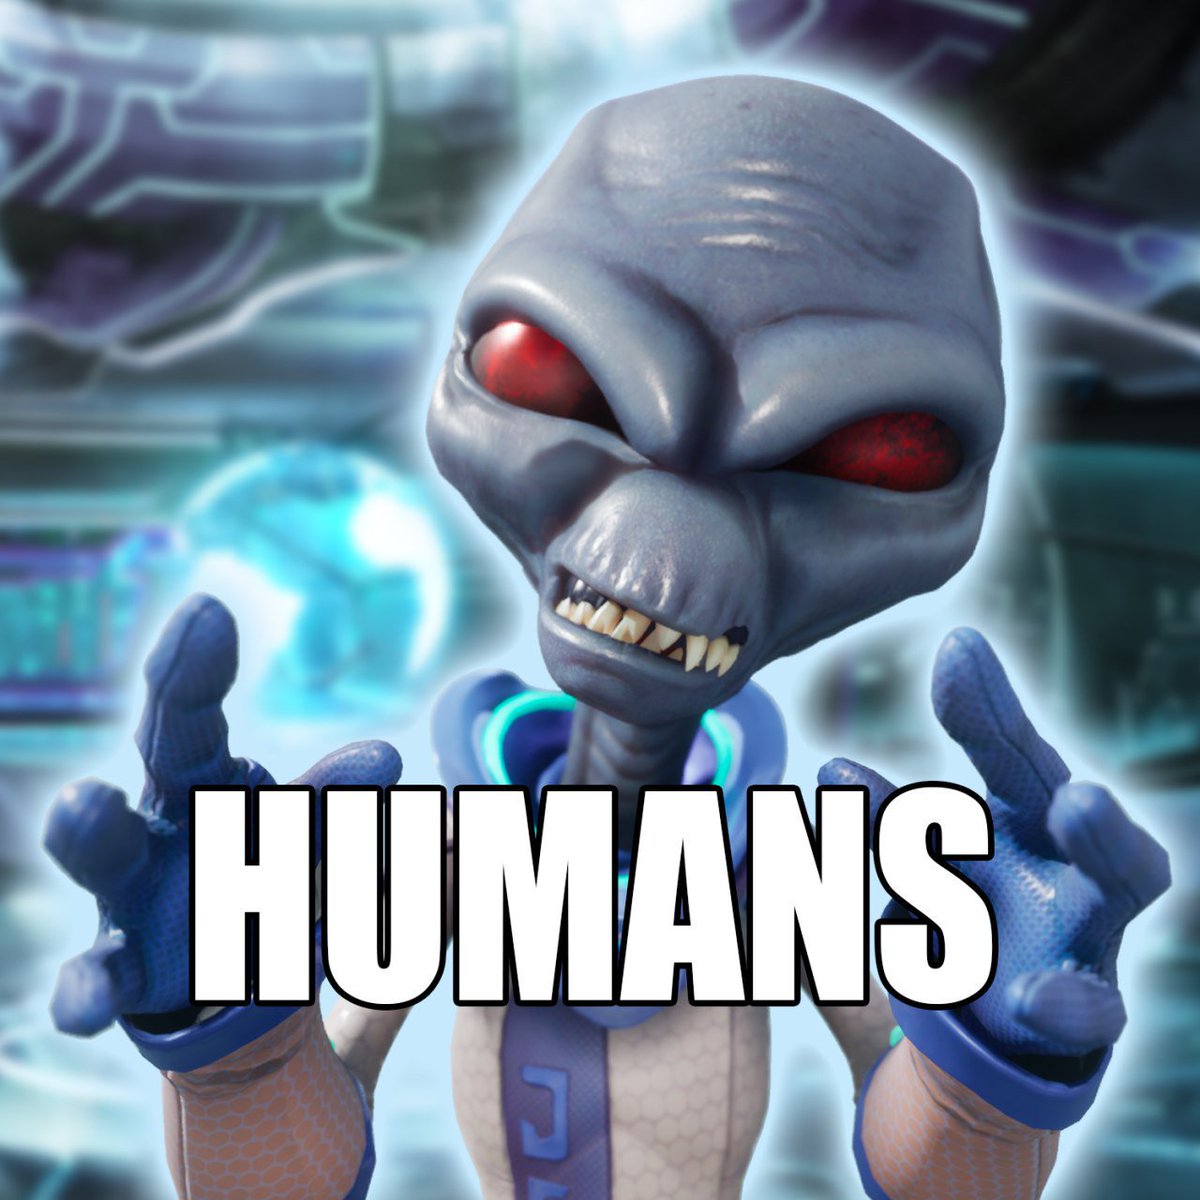 Destroy all humans who voices crypto best deals on betting sites